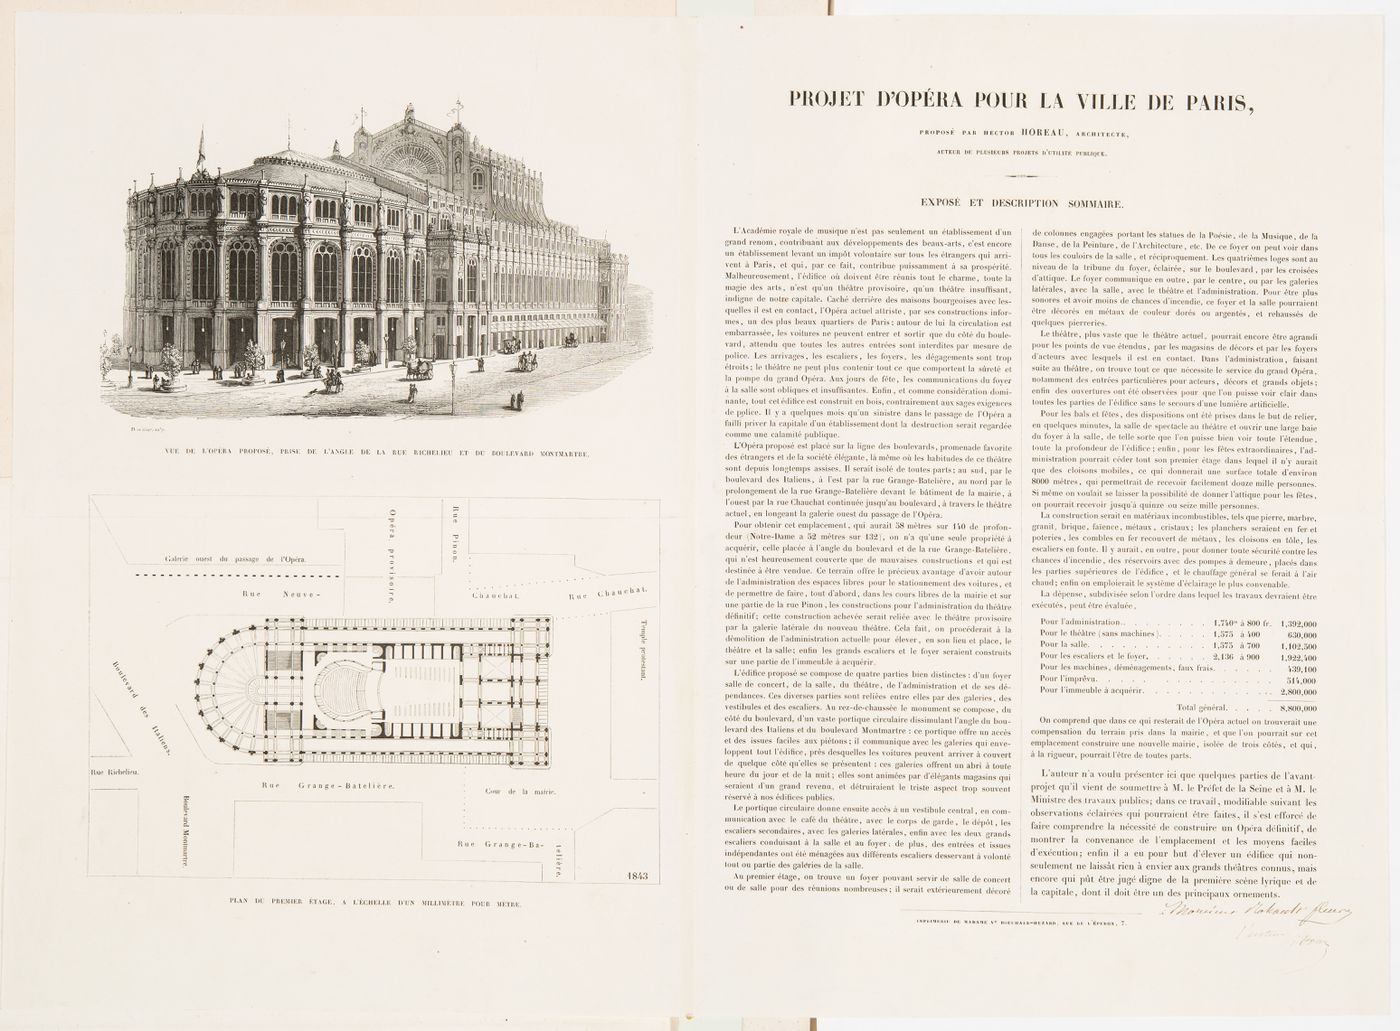 Design for the Opéra by Hector Horeau, Paris: Description with perspective and plan